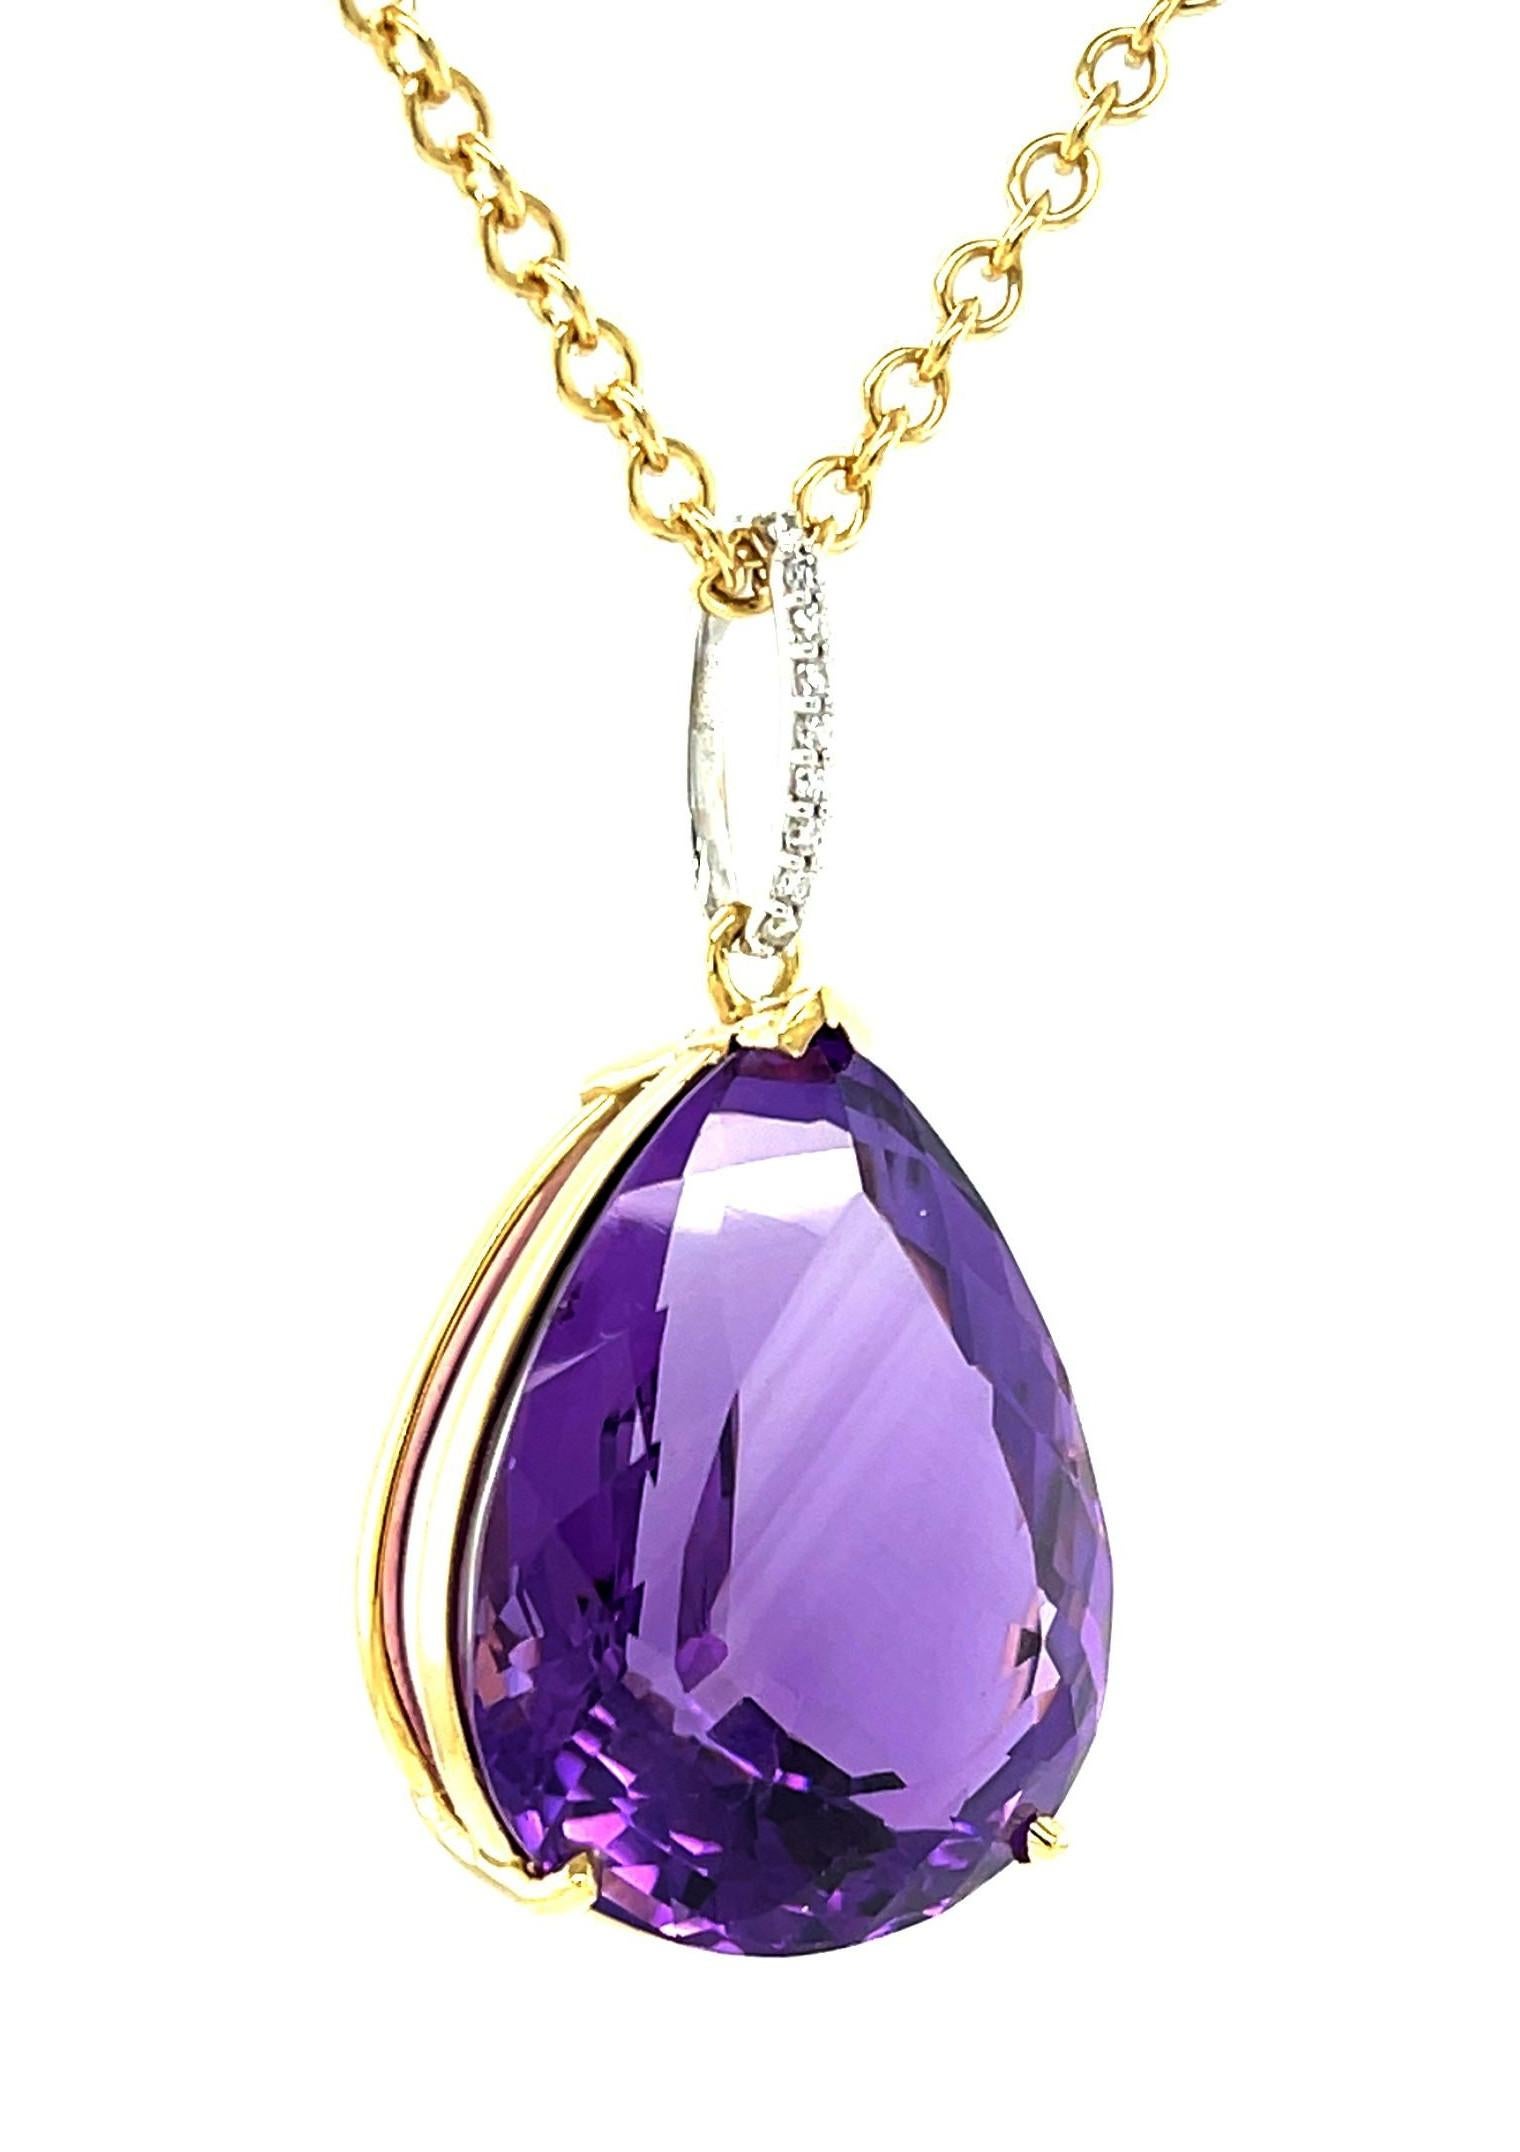 This eye-catching necklace features an impressive and absolutely stunning amethyst that weighs 40 carats! Set in a custom-made 18k yellow gold basket that dangles from an elegant diamond-studded 18k white gold bail, this necklace can be paired with